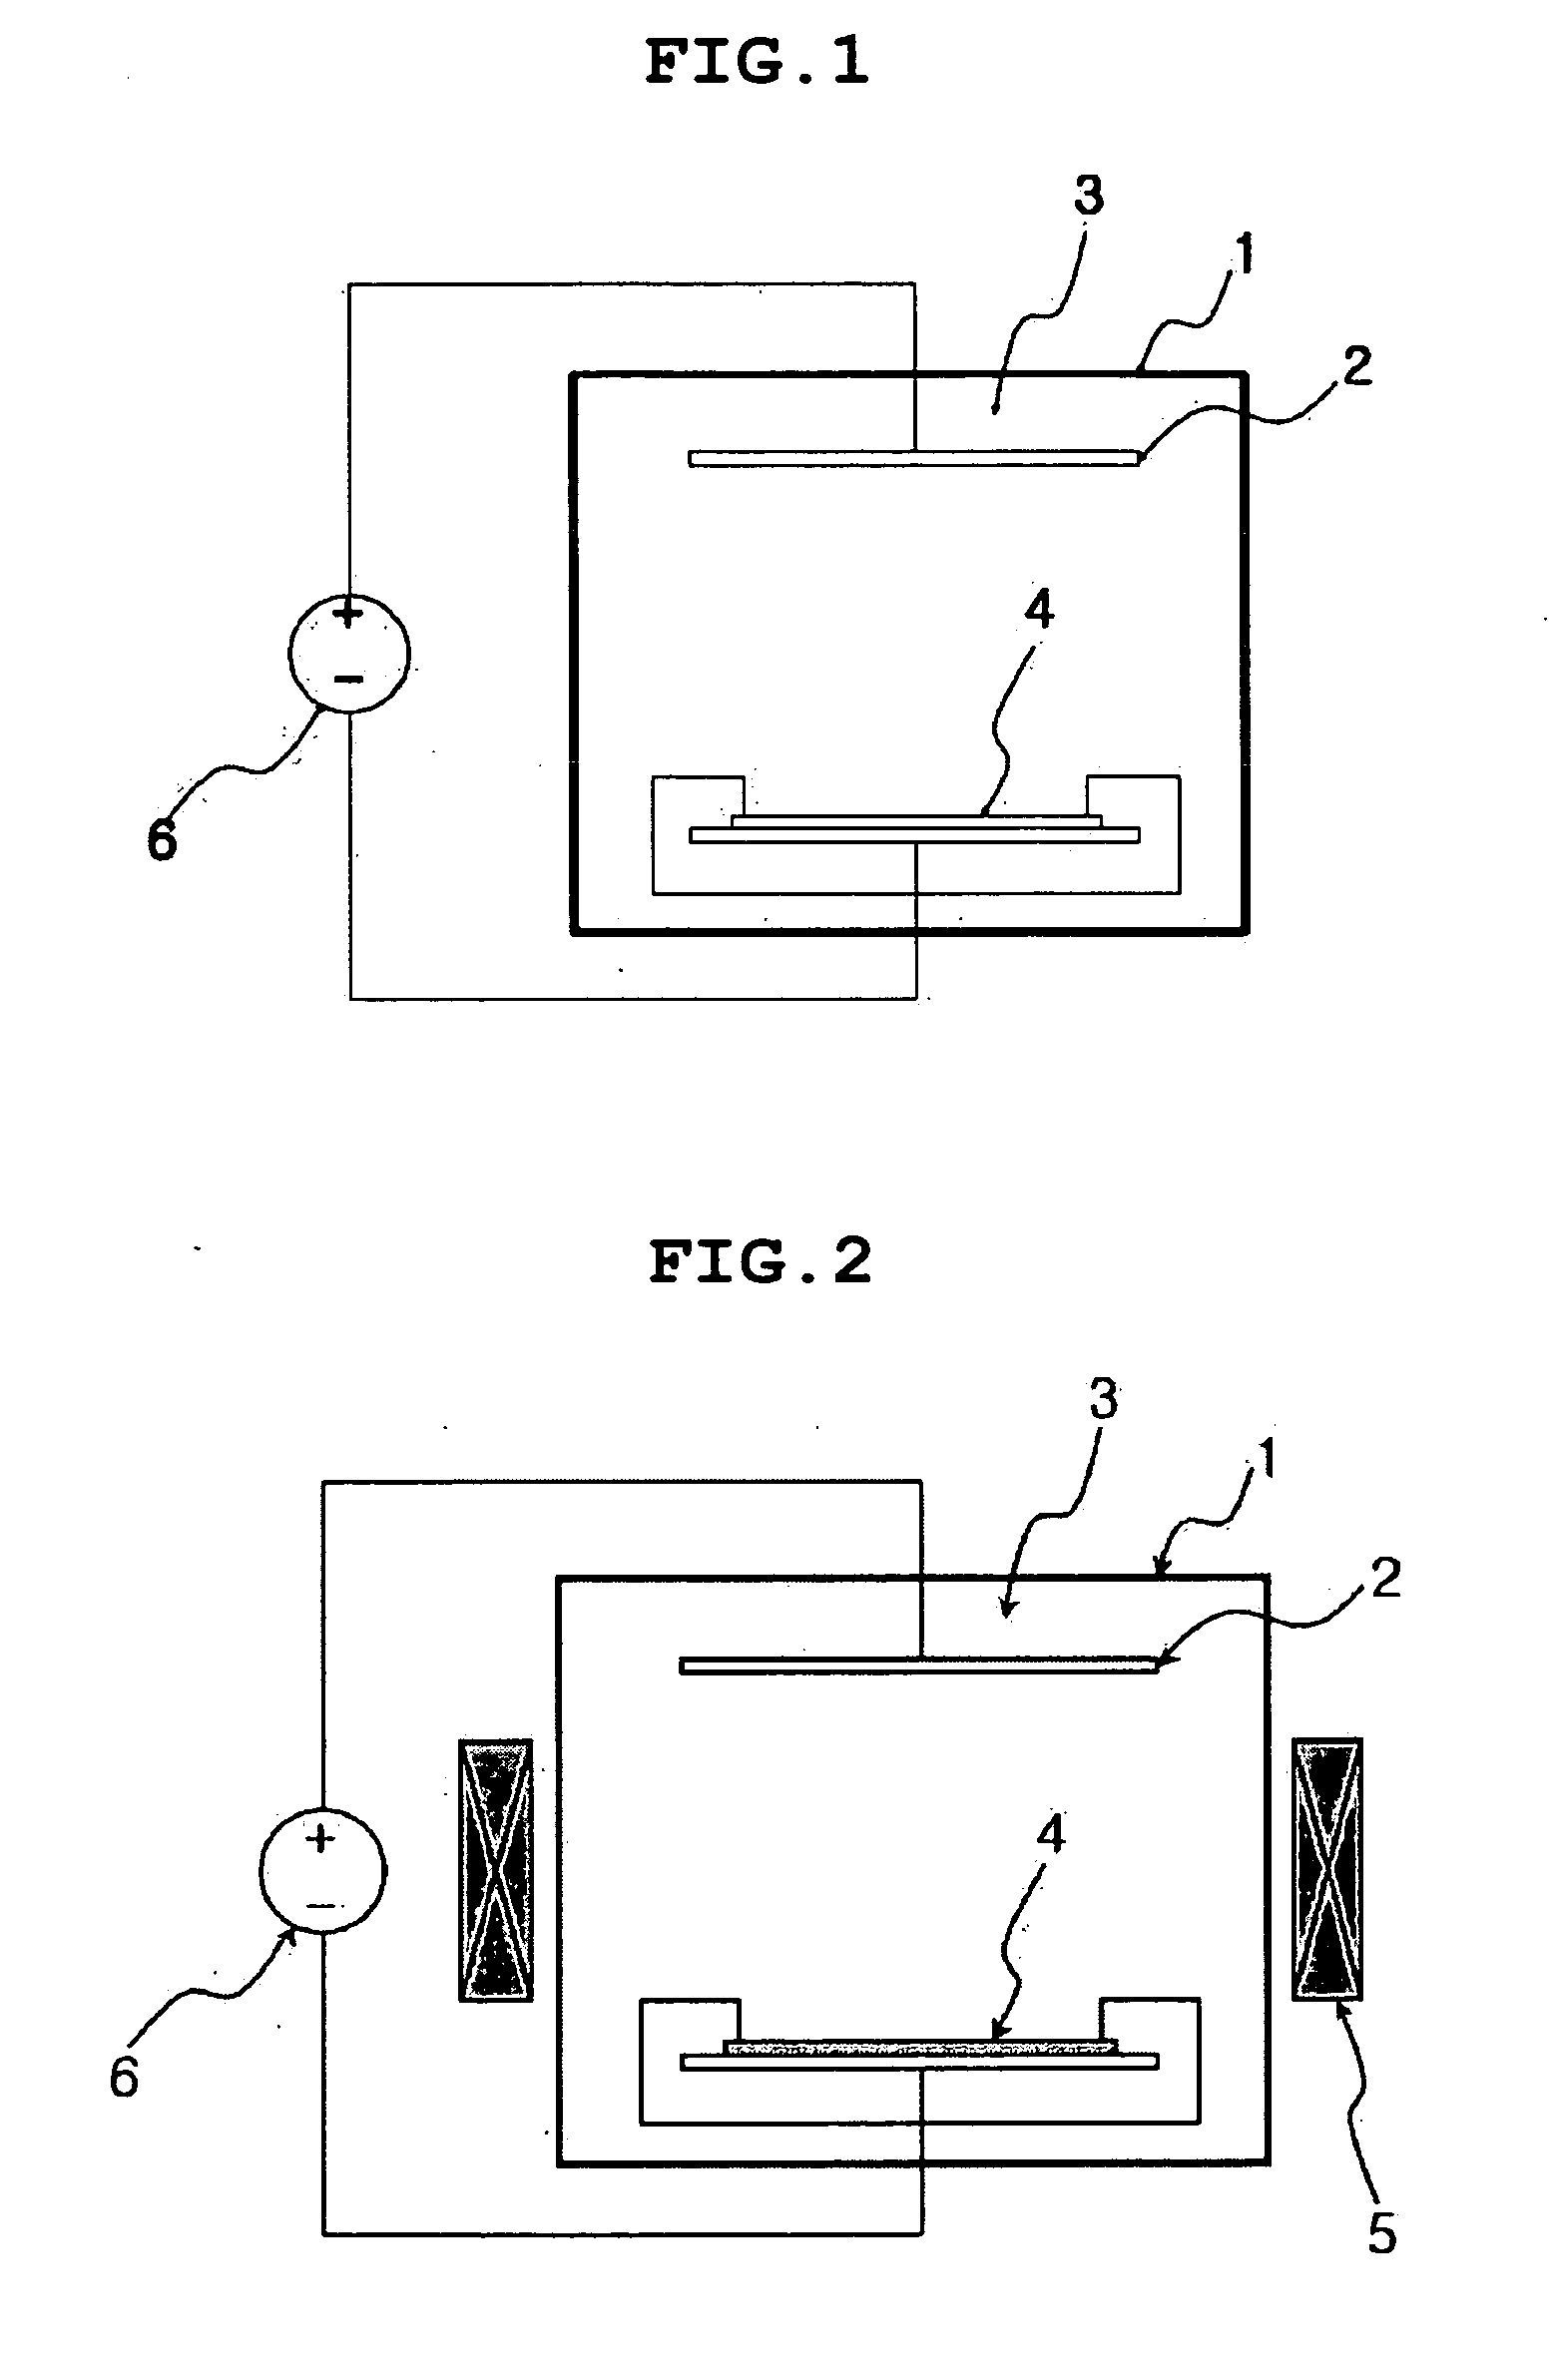 Method of electroplating printed circuit board using magnetic field having periodic directionality